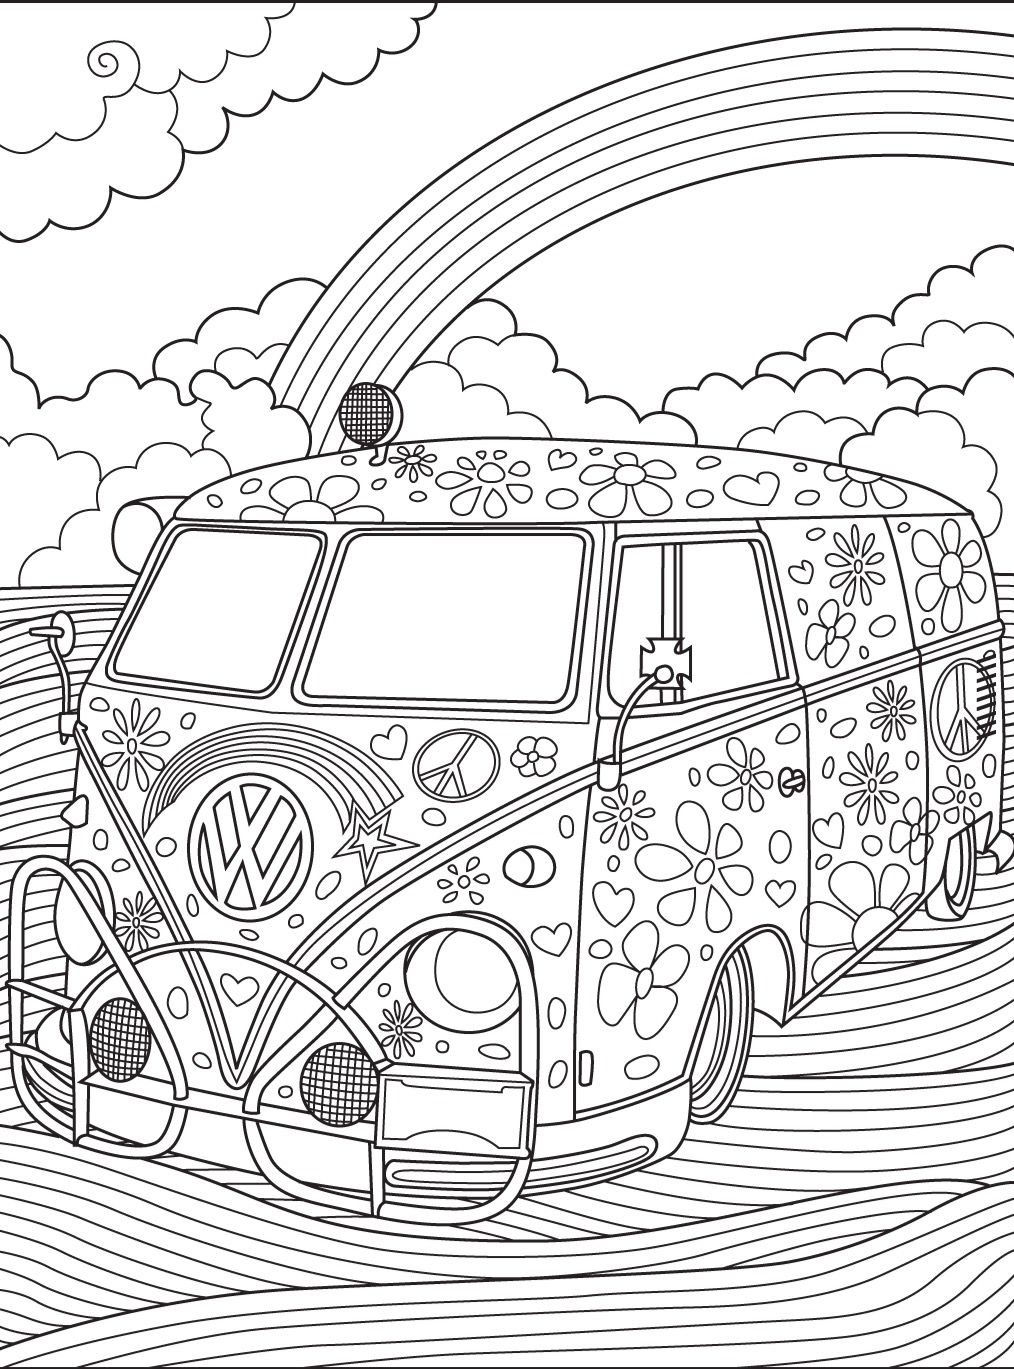 Volkswagen Coloring Pages - Coloring Home